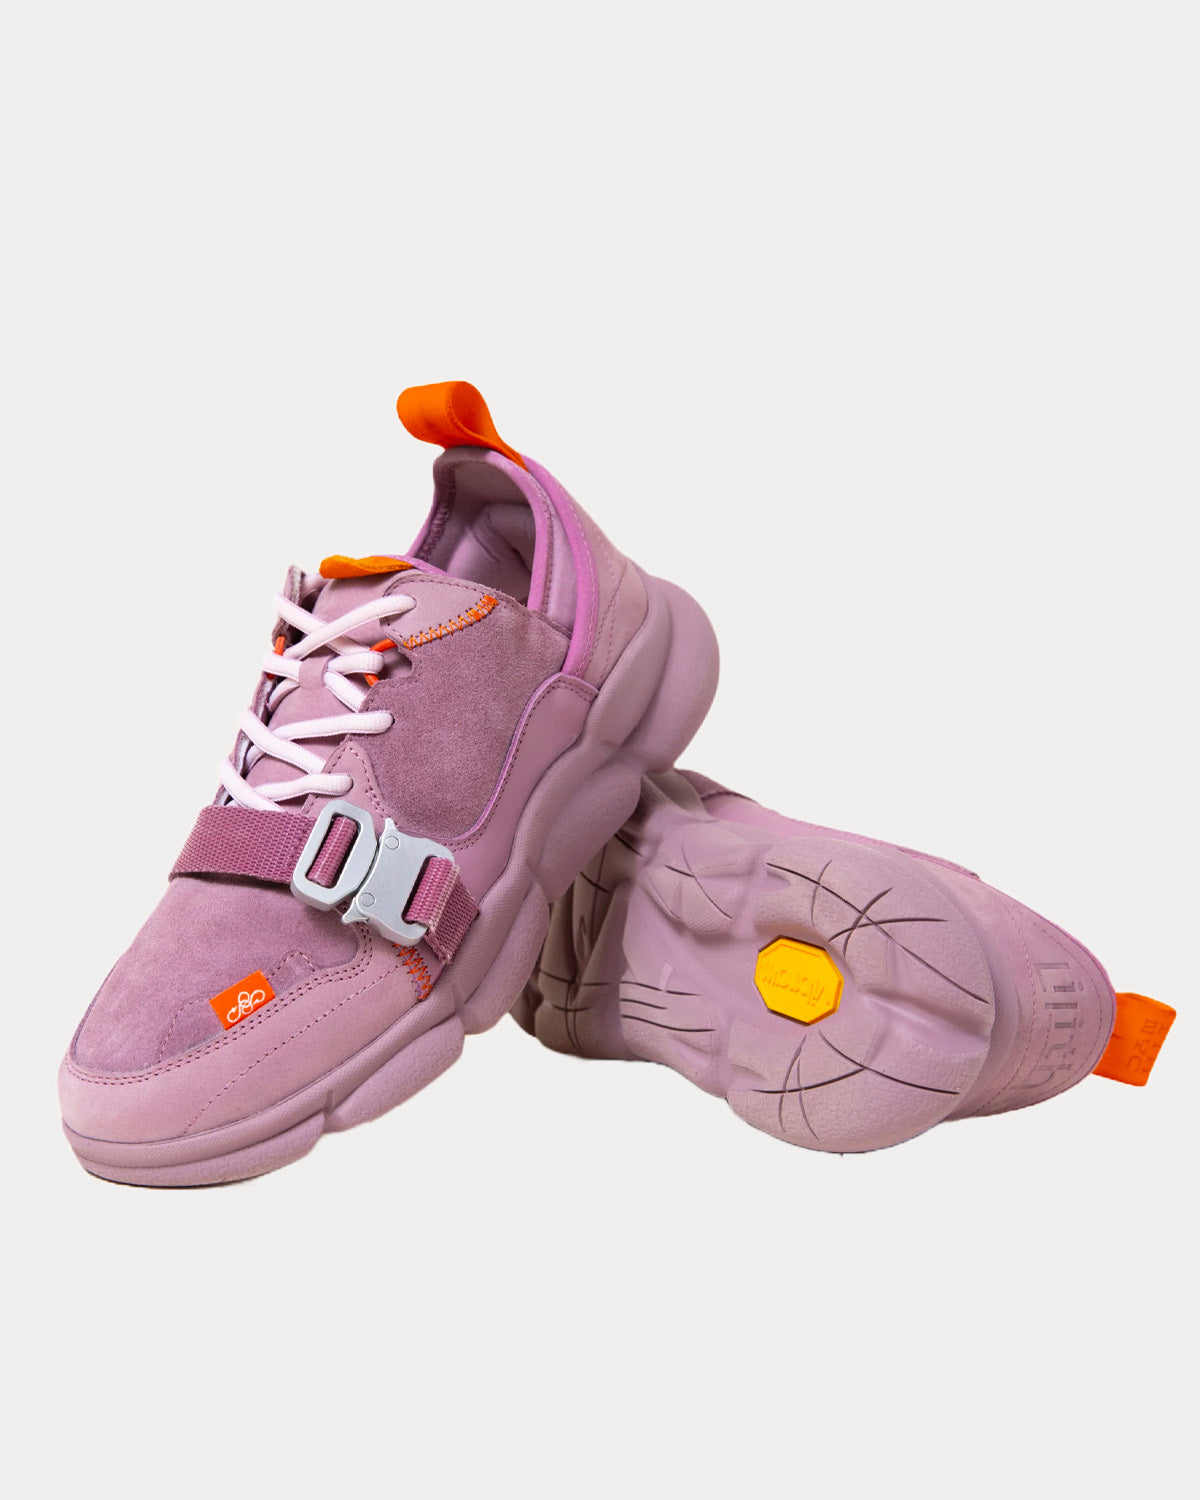 Lilith NYC - Caudal Lure Purple Sunsets Low Top Sneakers